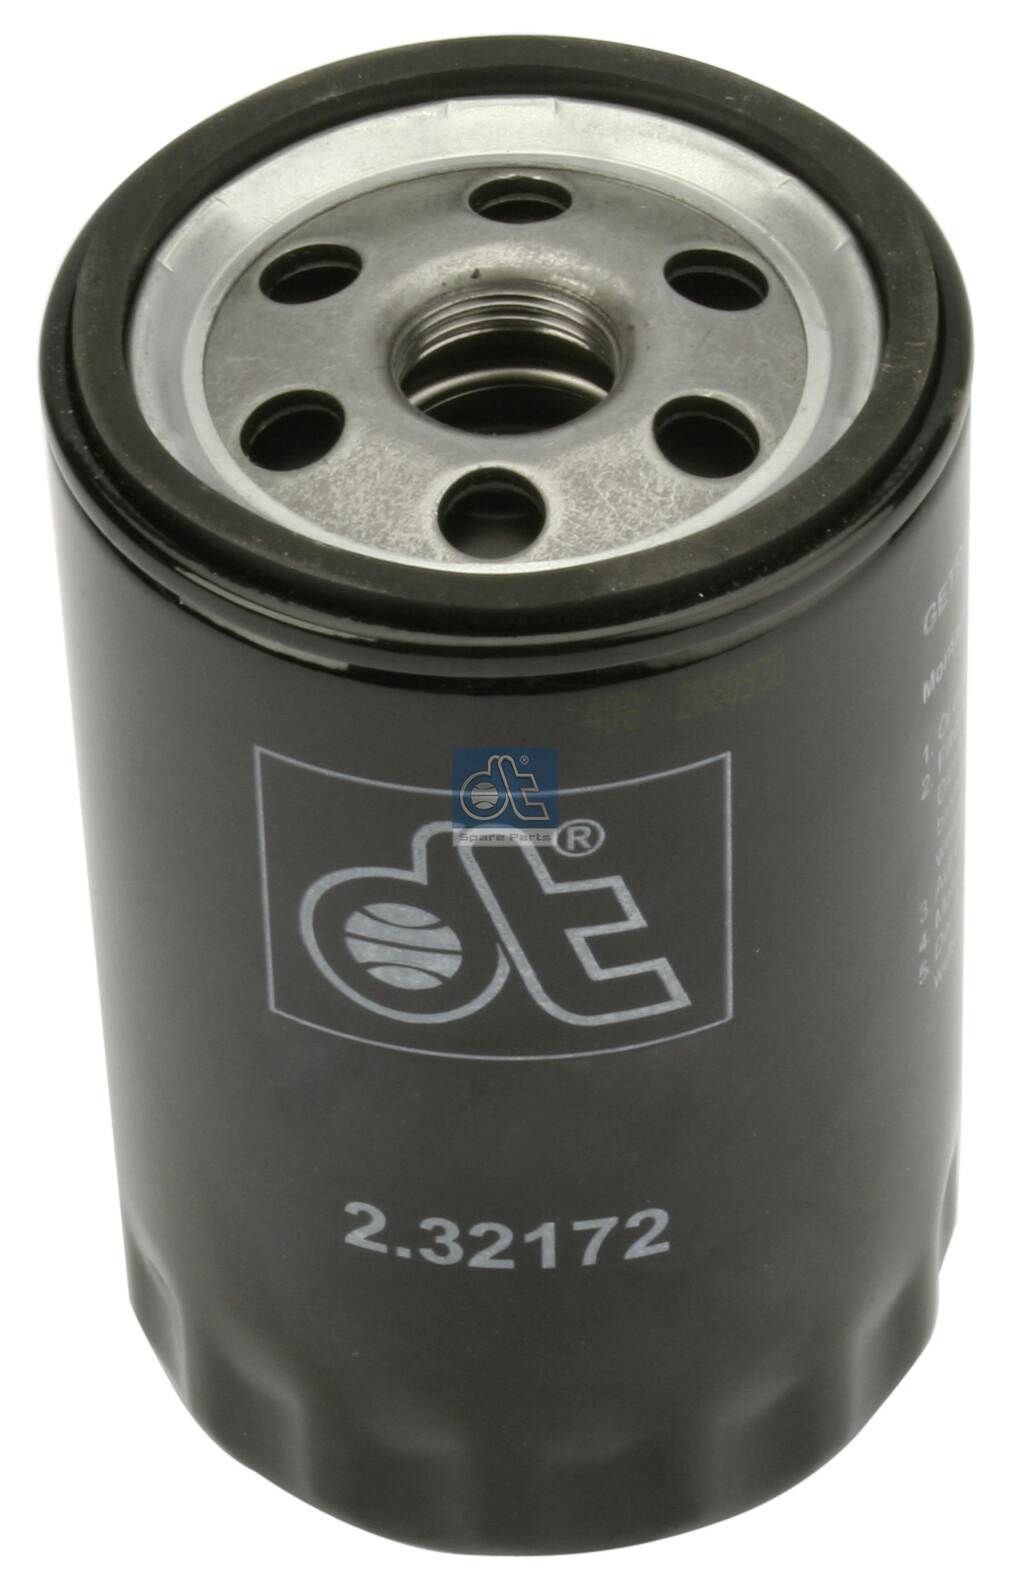 H14W02 DT Spare Parts 2.32172 Oil filter 15213 3209 0